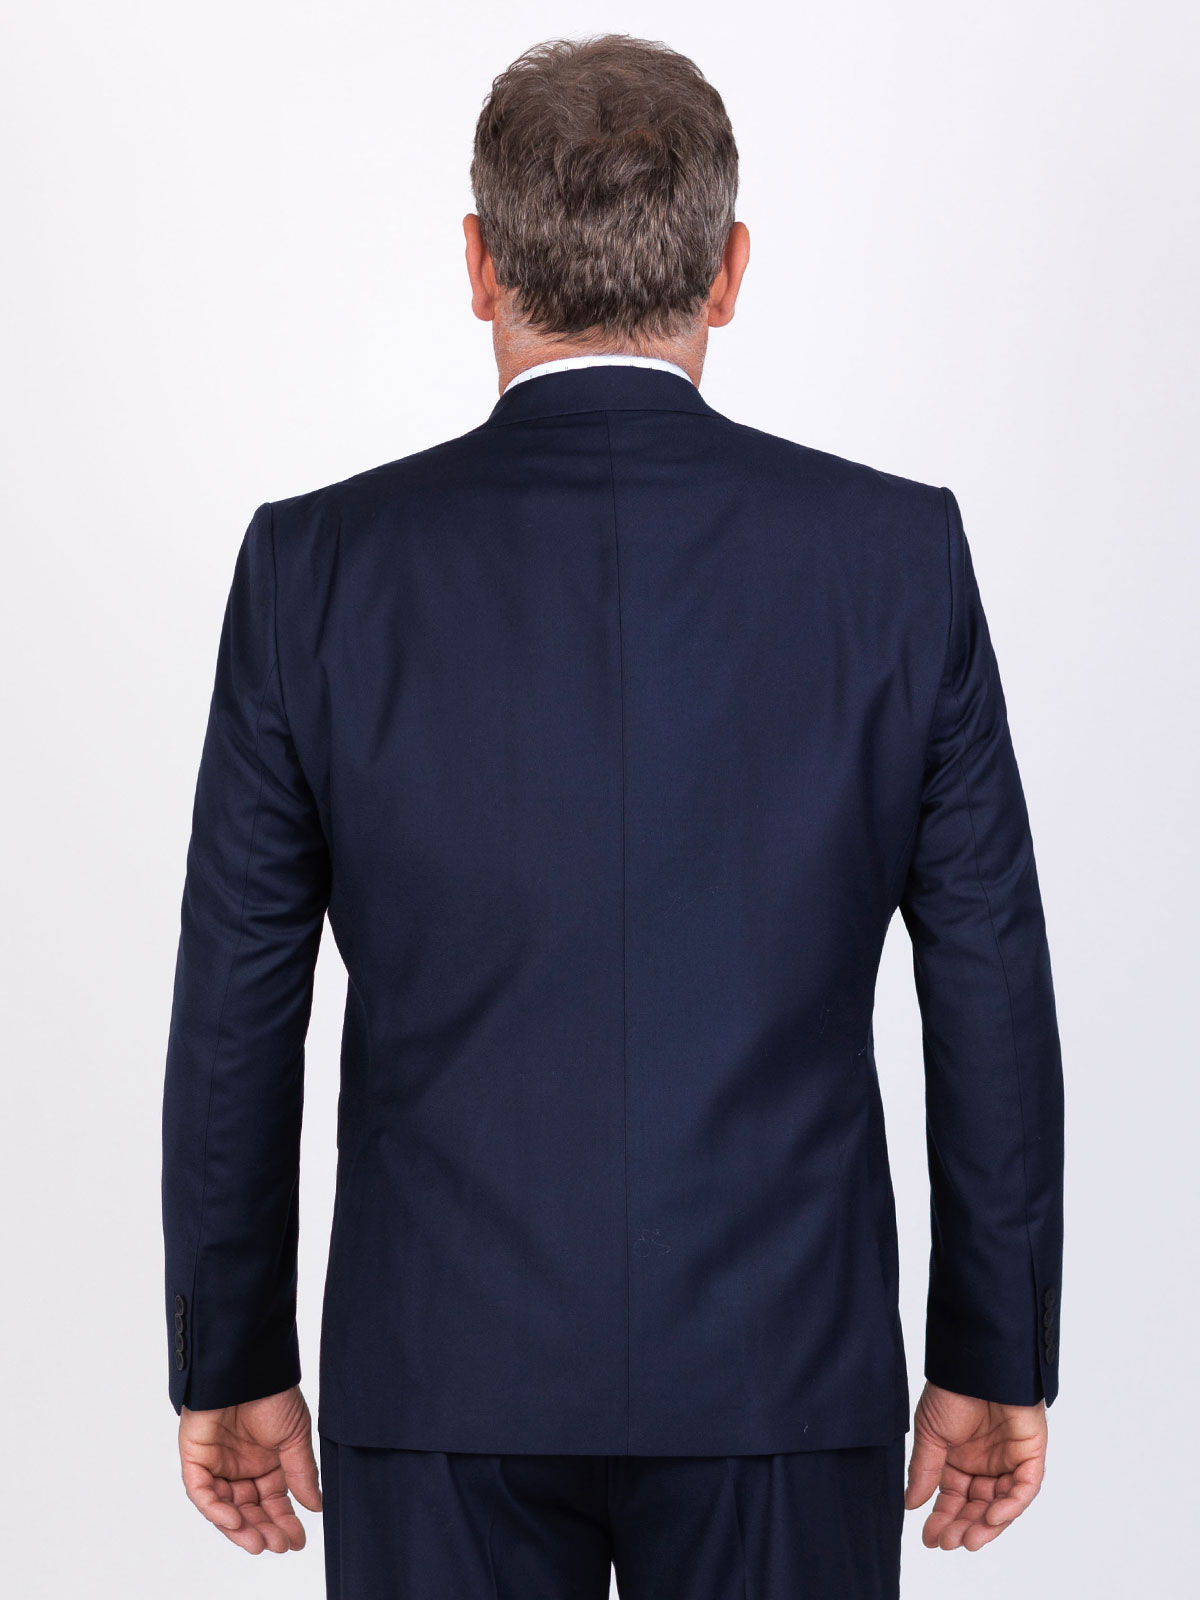 Mens jacket in blue max - 64129 € 141.73 img3